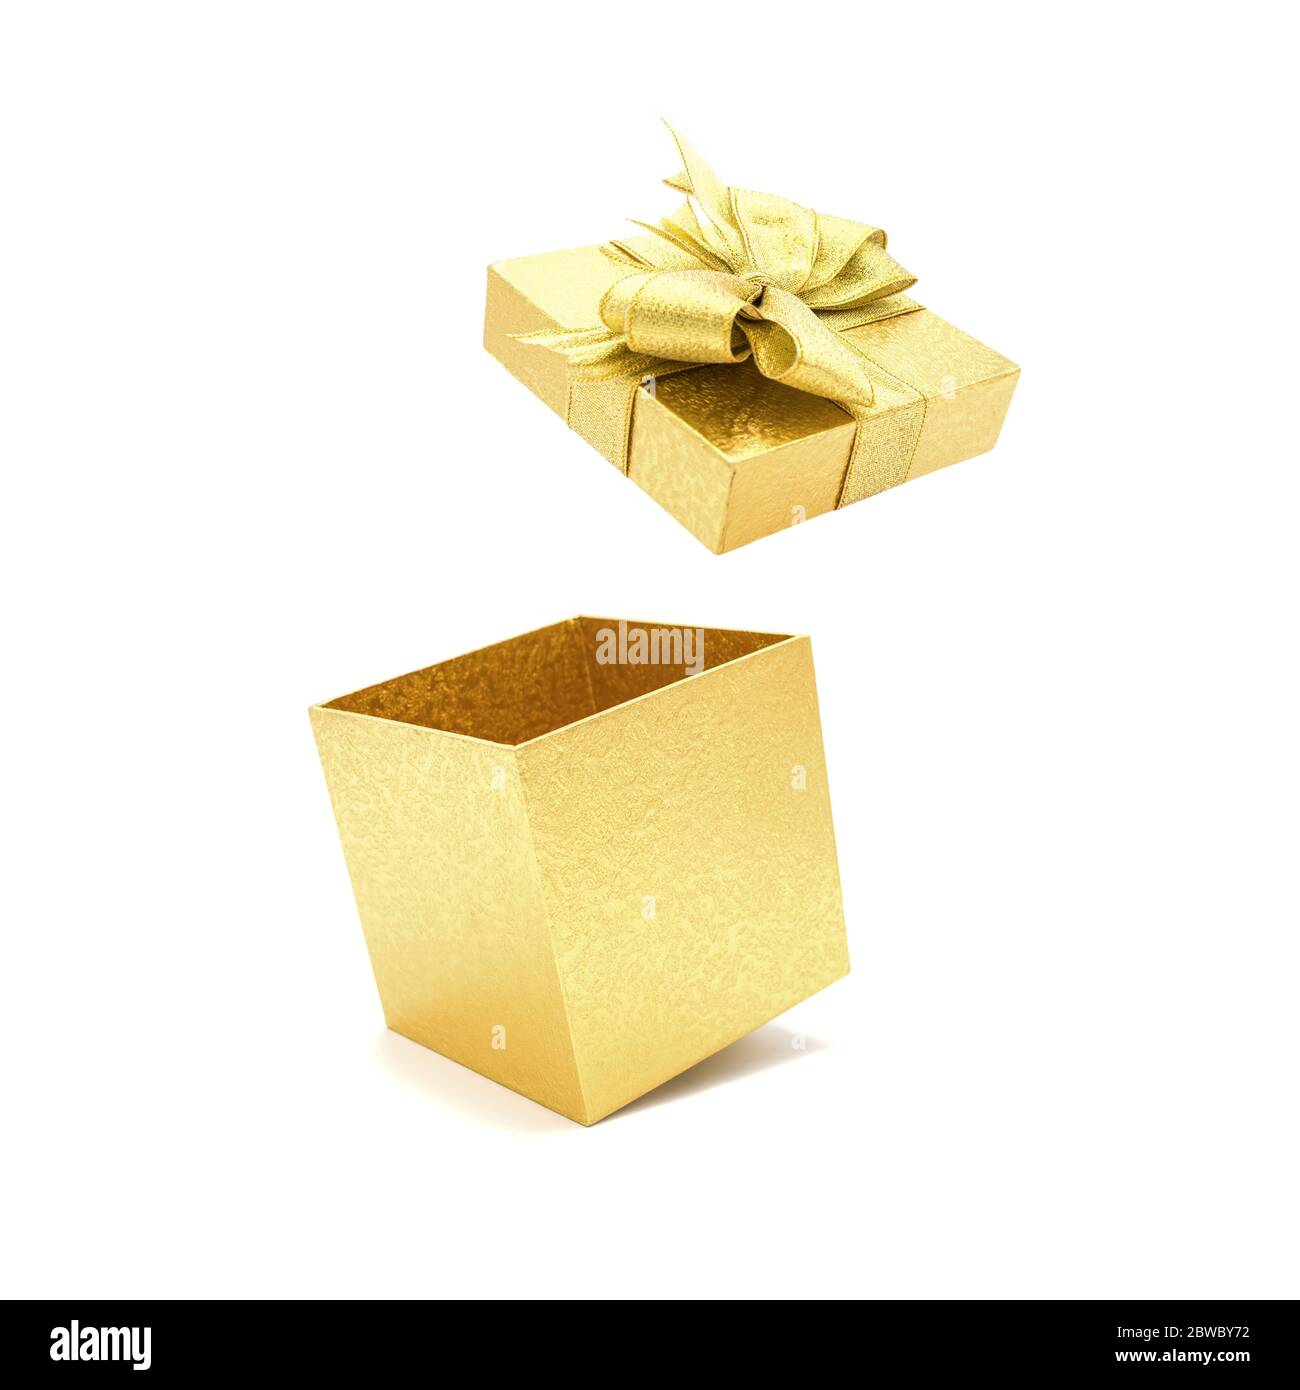 Gold gift box with bow open, isolated on white background. Stock Photo